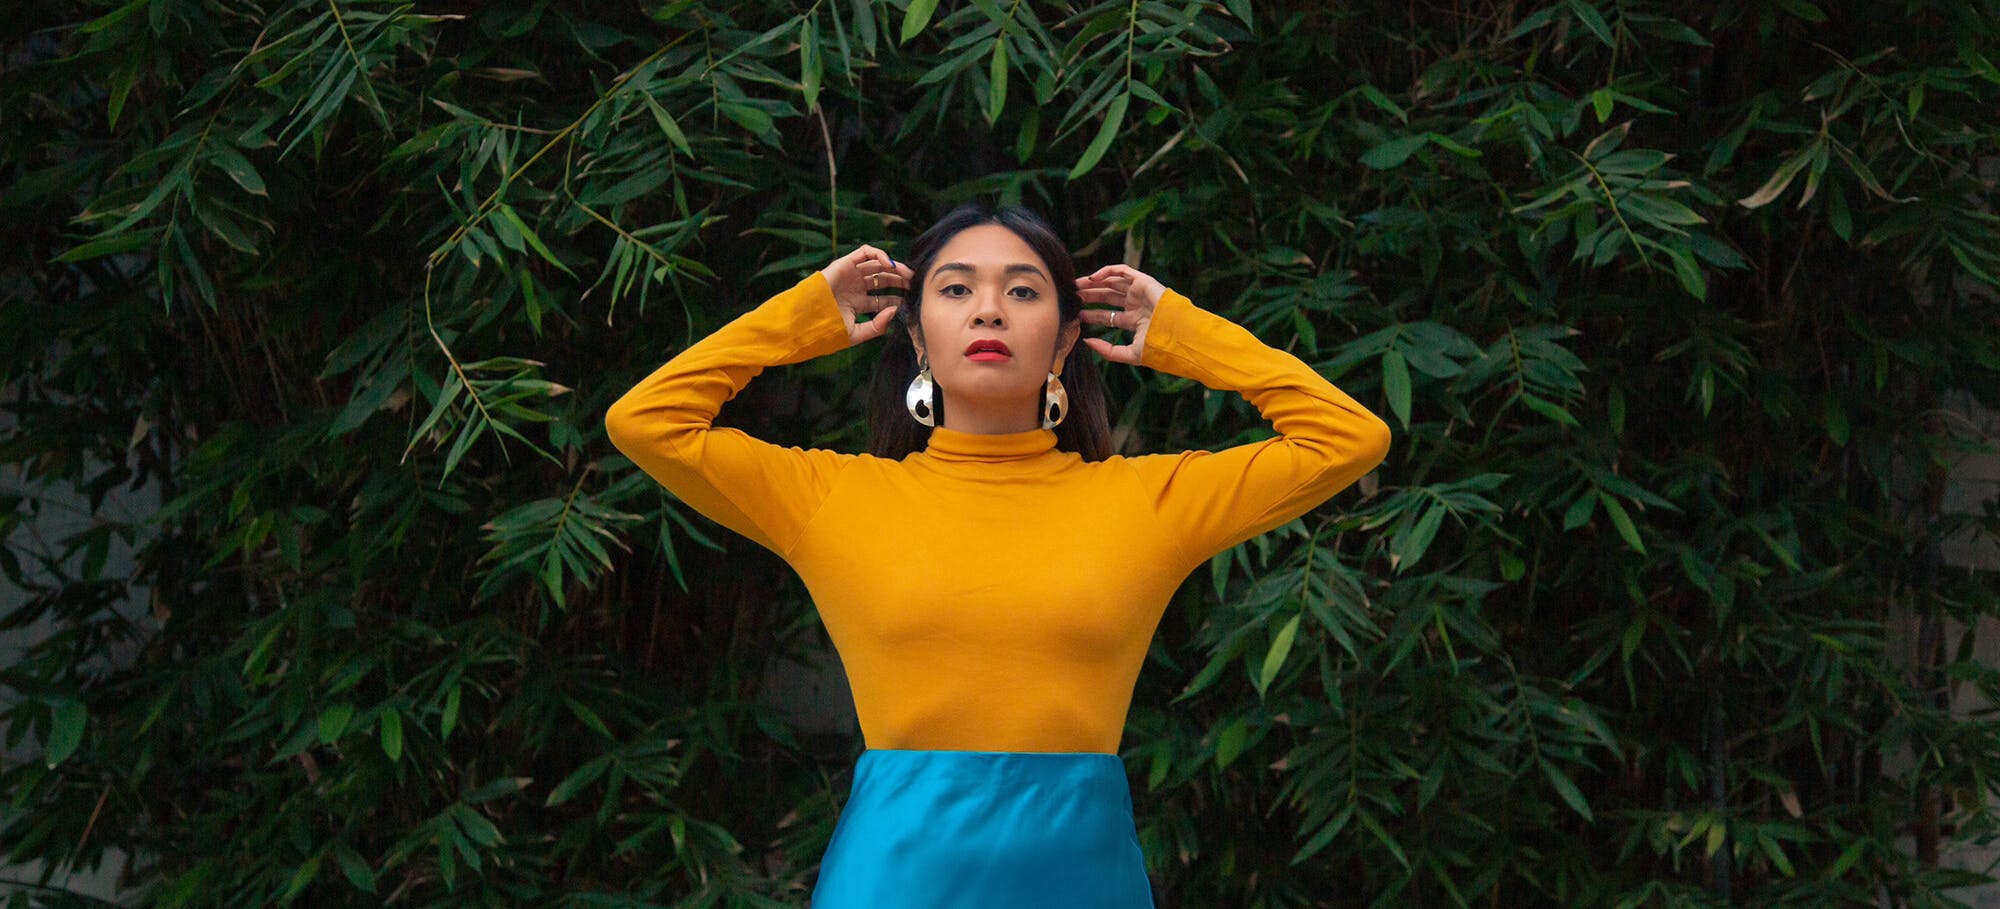 Image of Kara outdoors with her arms raised in front of foliage, wearing a bright yellow top and blue skirt